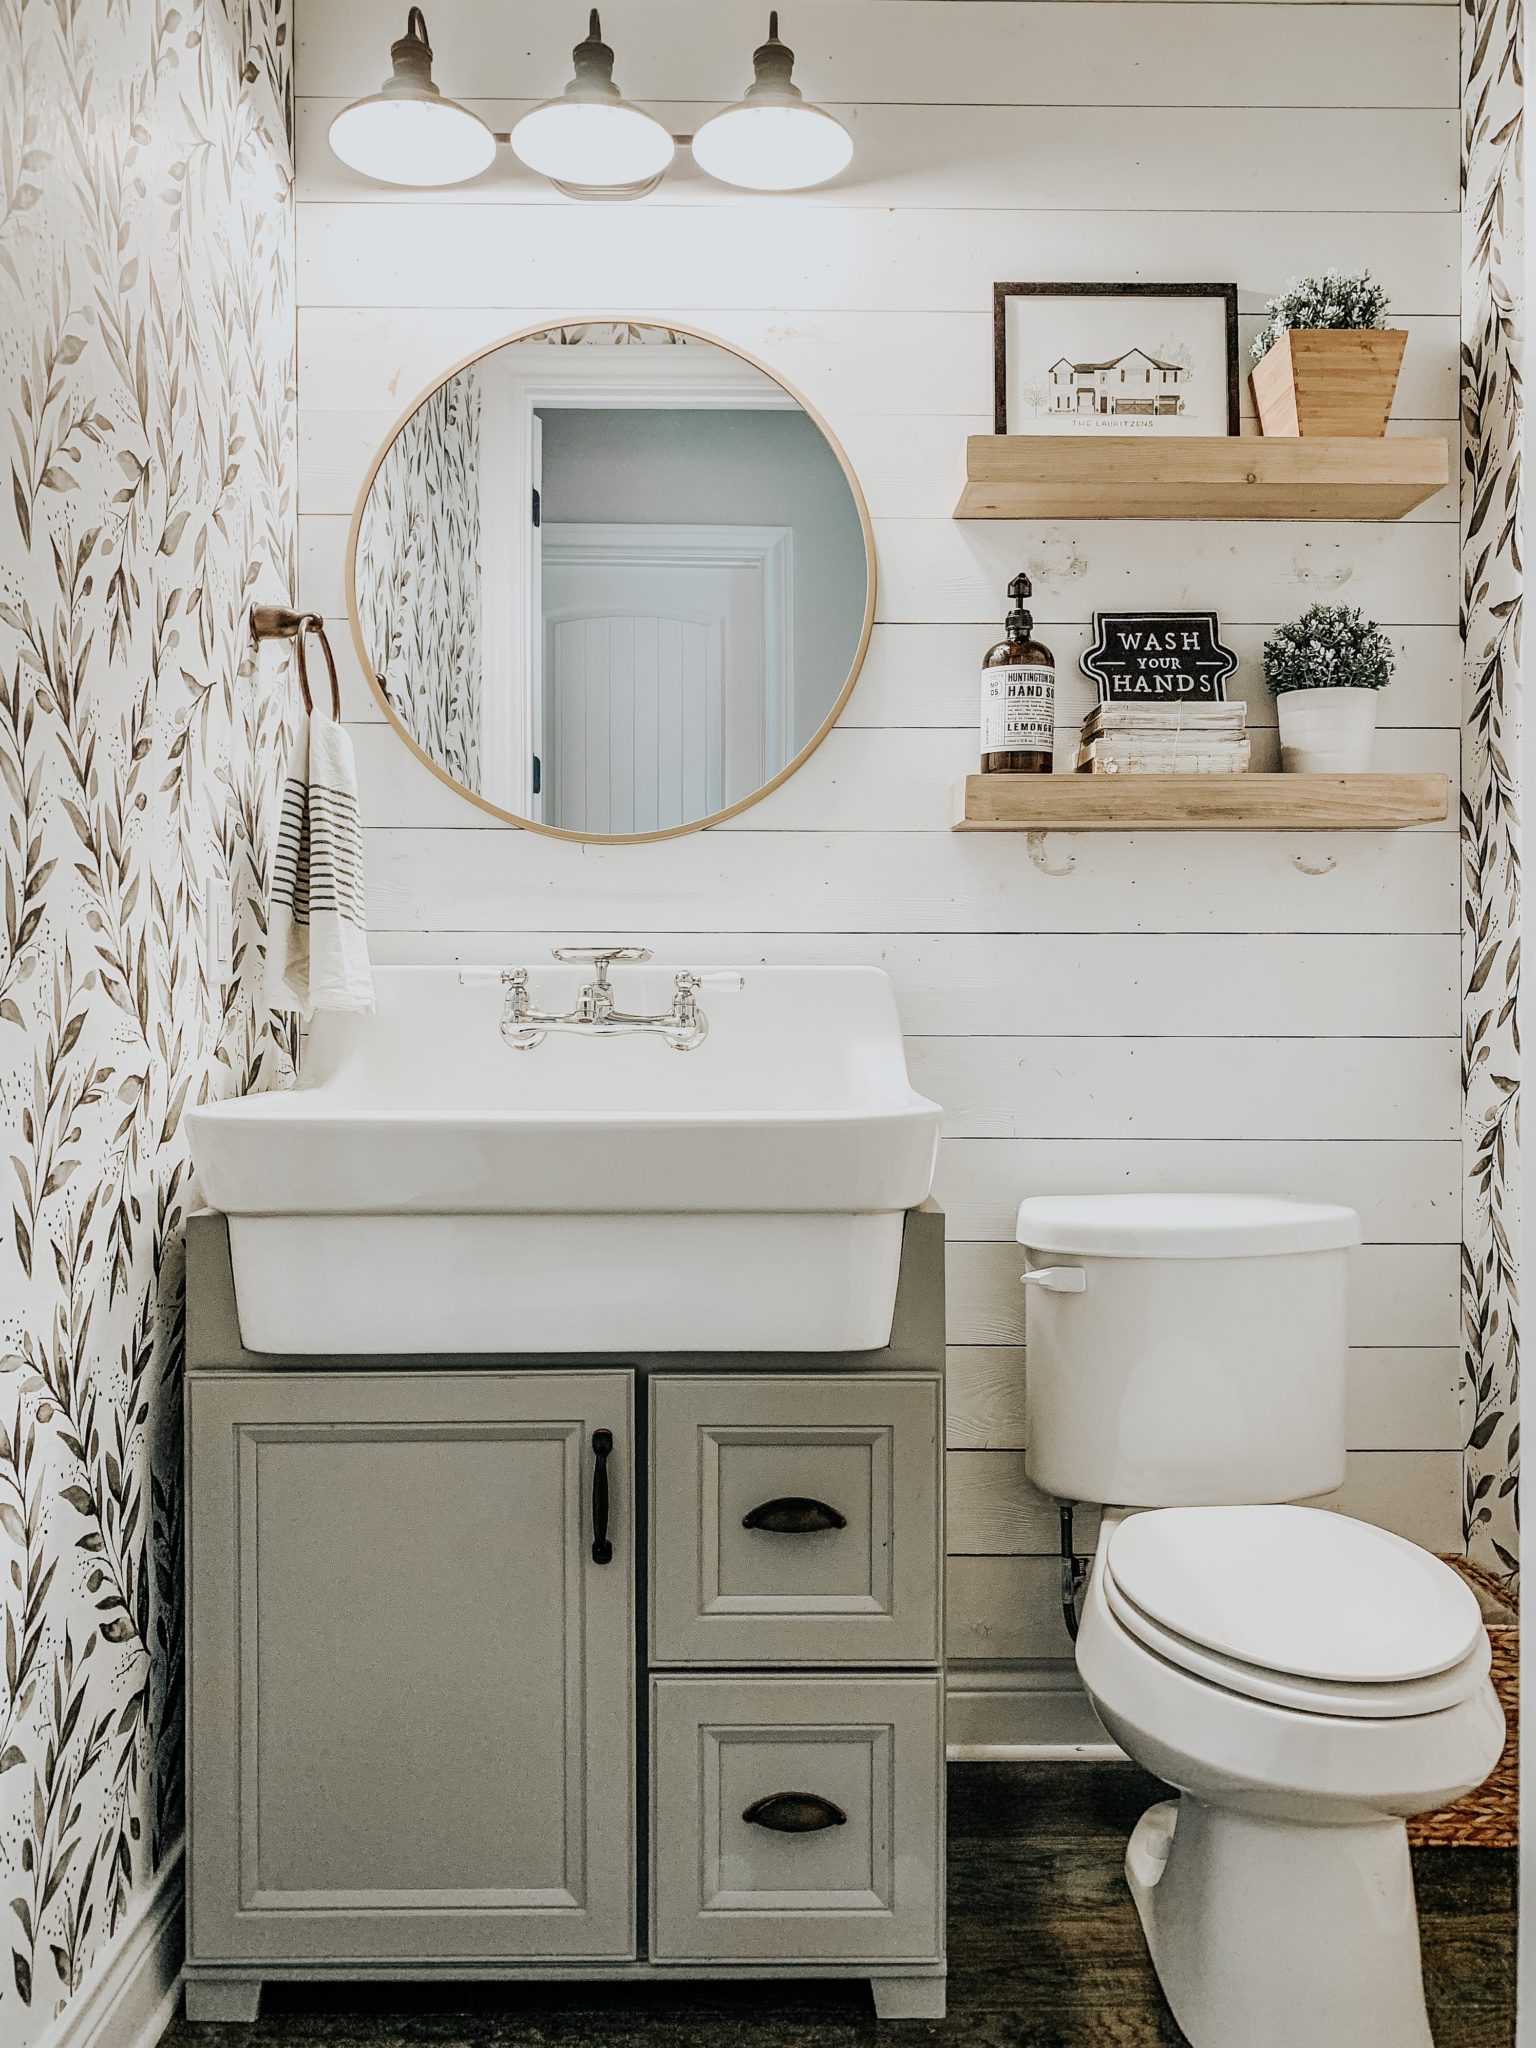 sage green cabinet with a vintage sink and leaf print wallpaper in this farmhouse bathroom